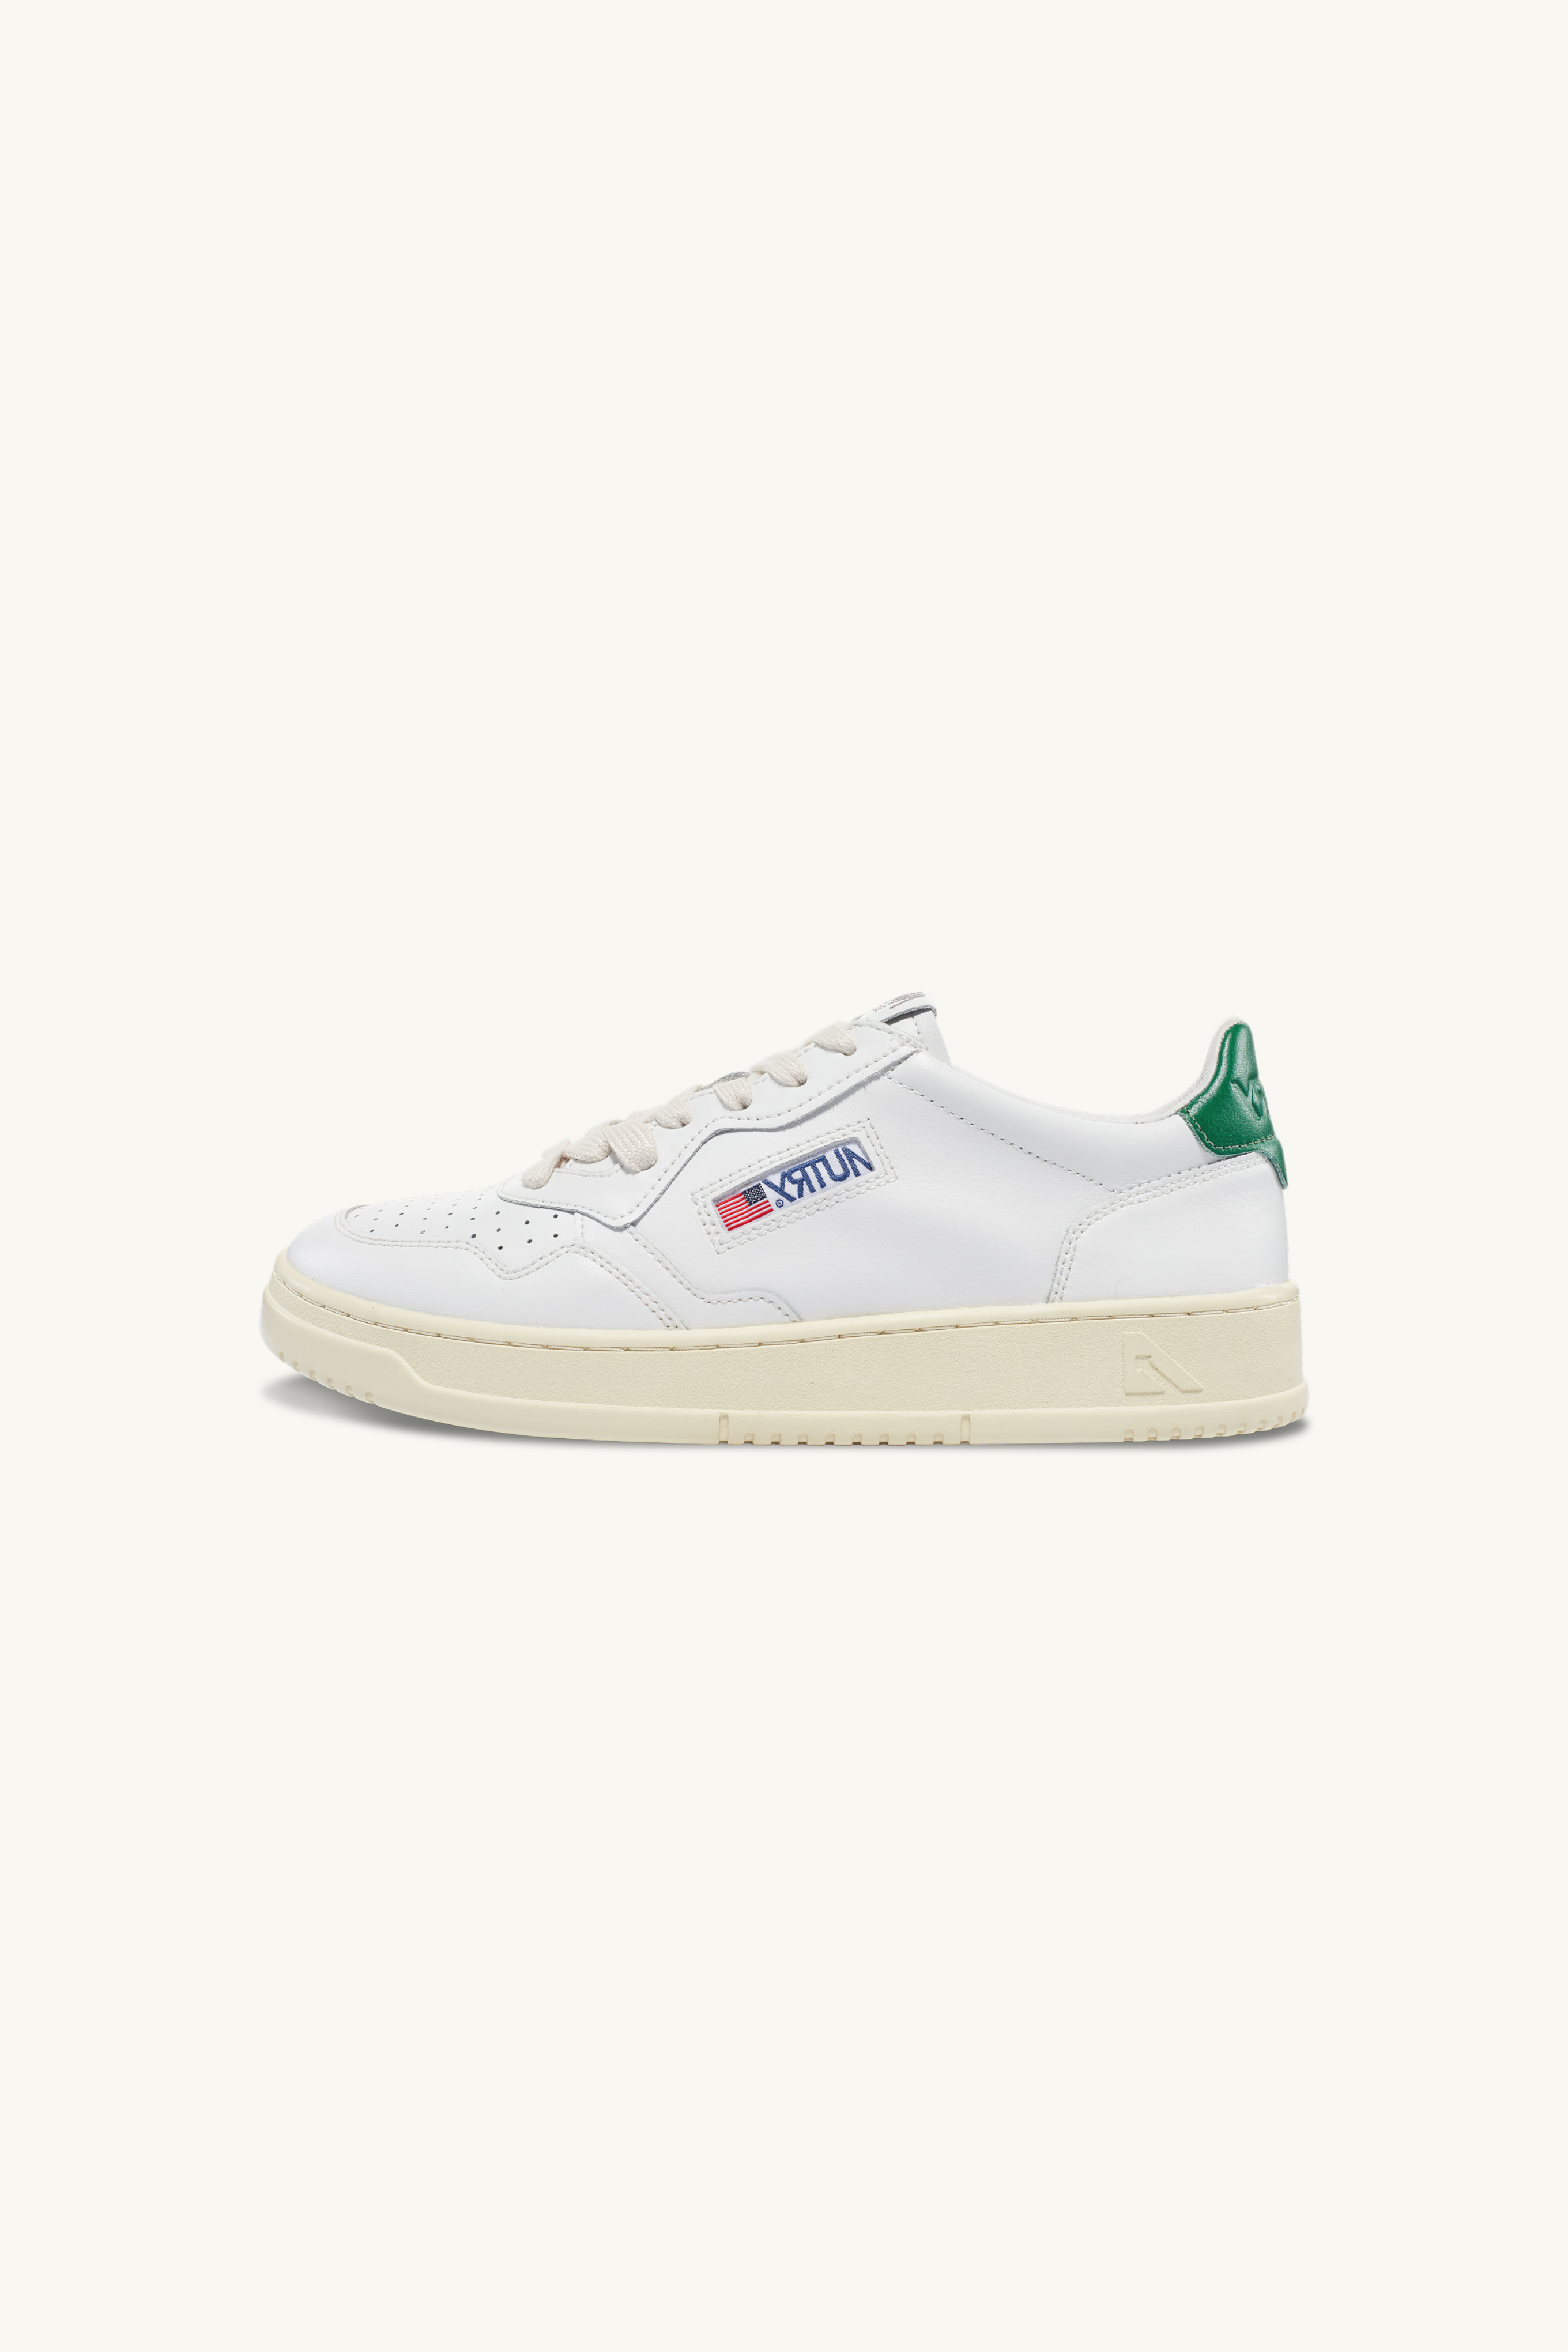 AULM-LL20 - MEDALIST LOW SNEAKERS IN LEATHER WHITE AND GREEN